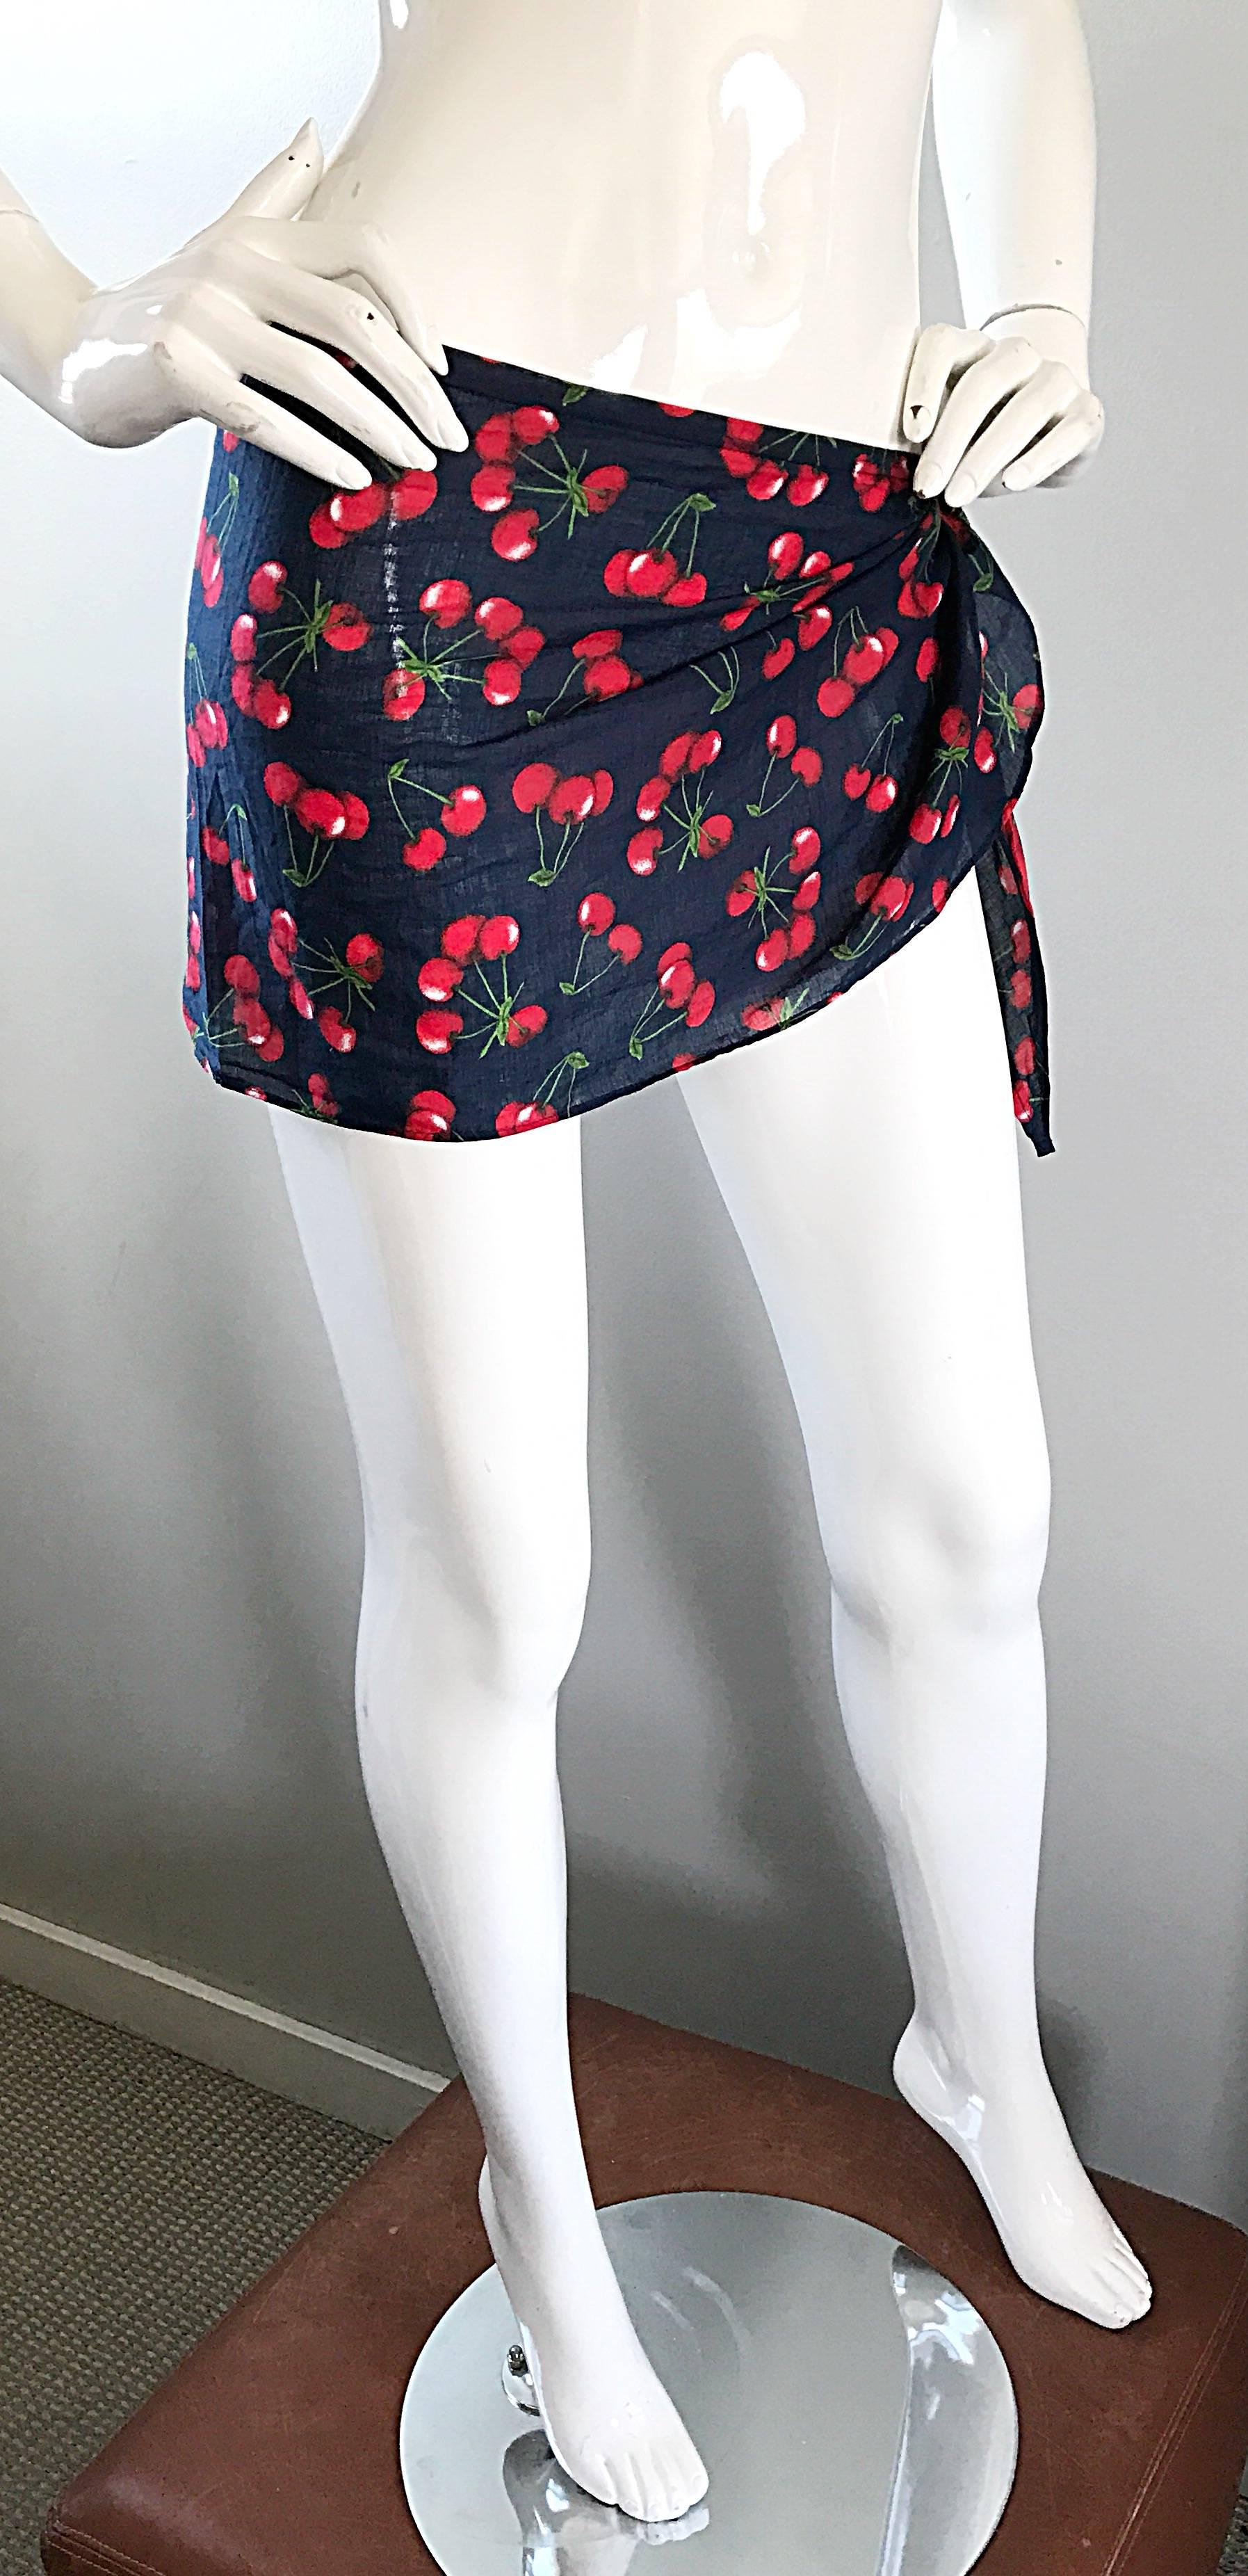 NWT 1990s Dolce and Gabbana Black and Red Cherry Print Swimsuit Cover Up Skirt 3